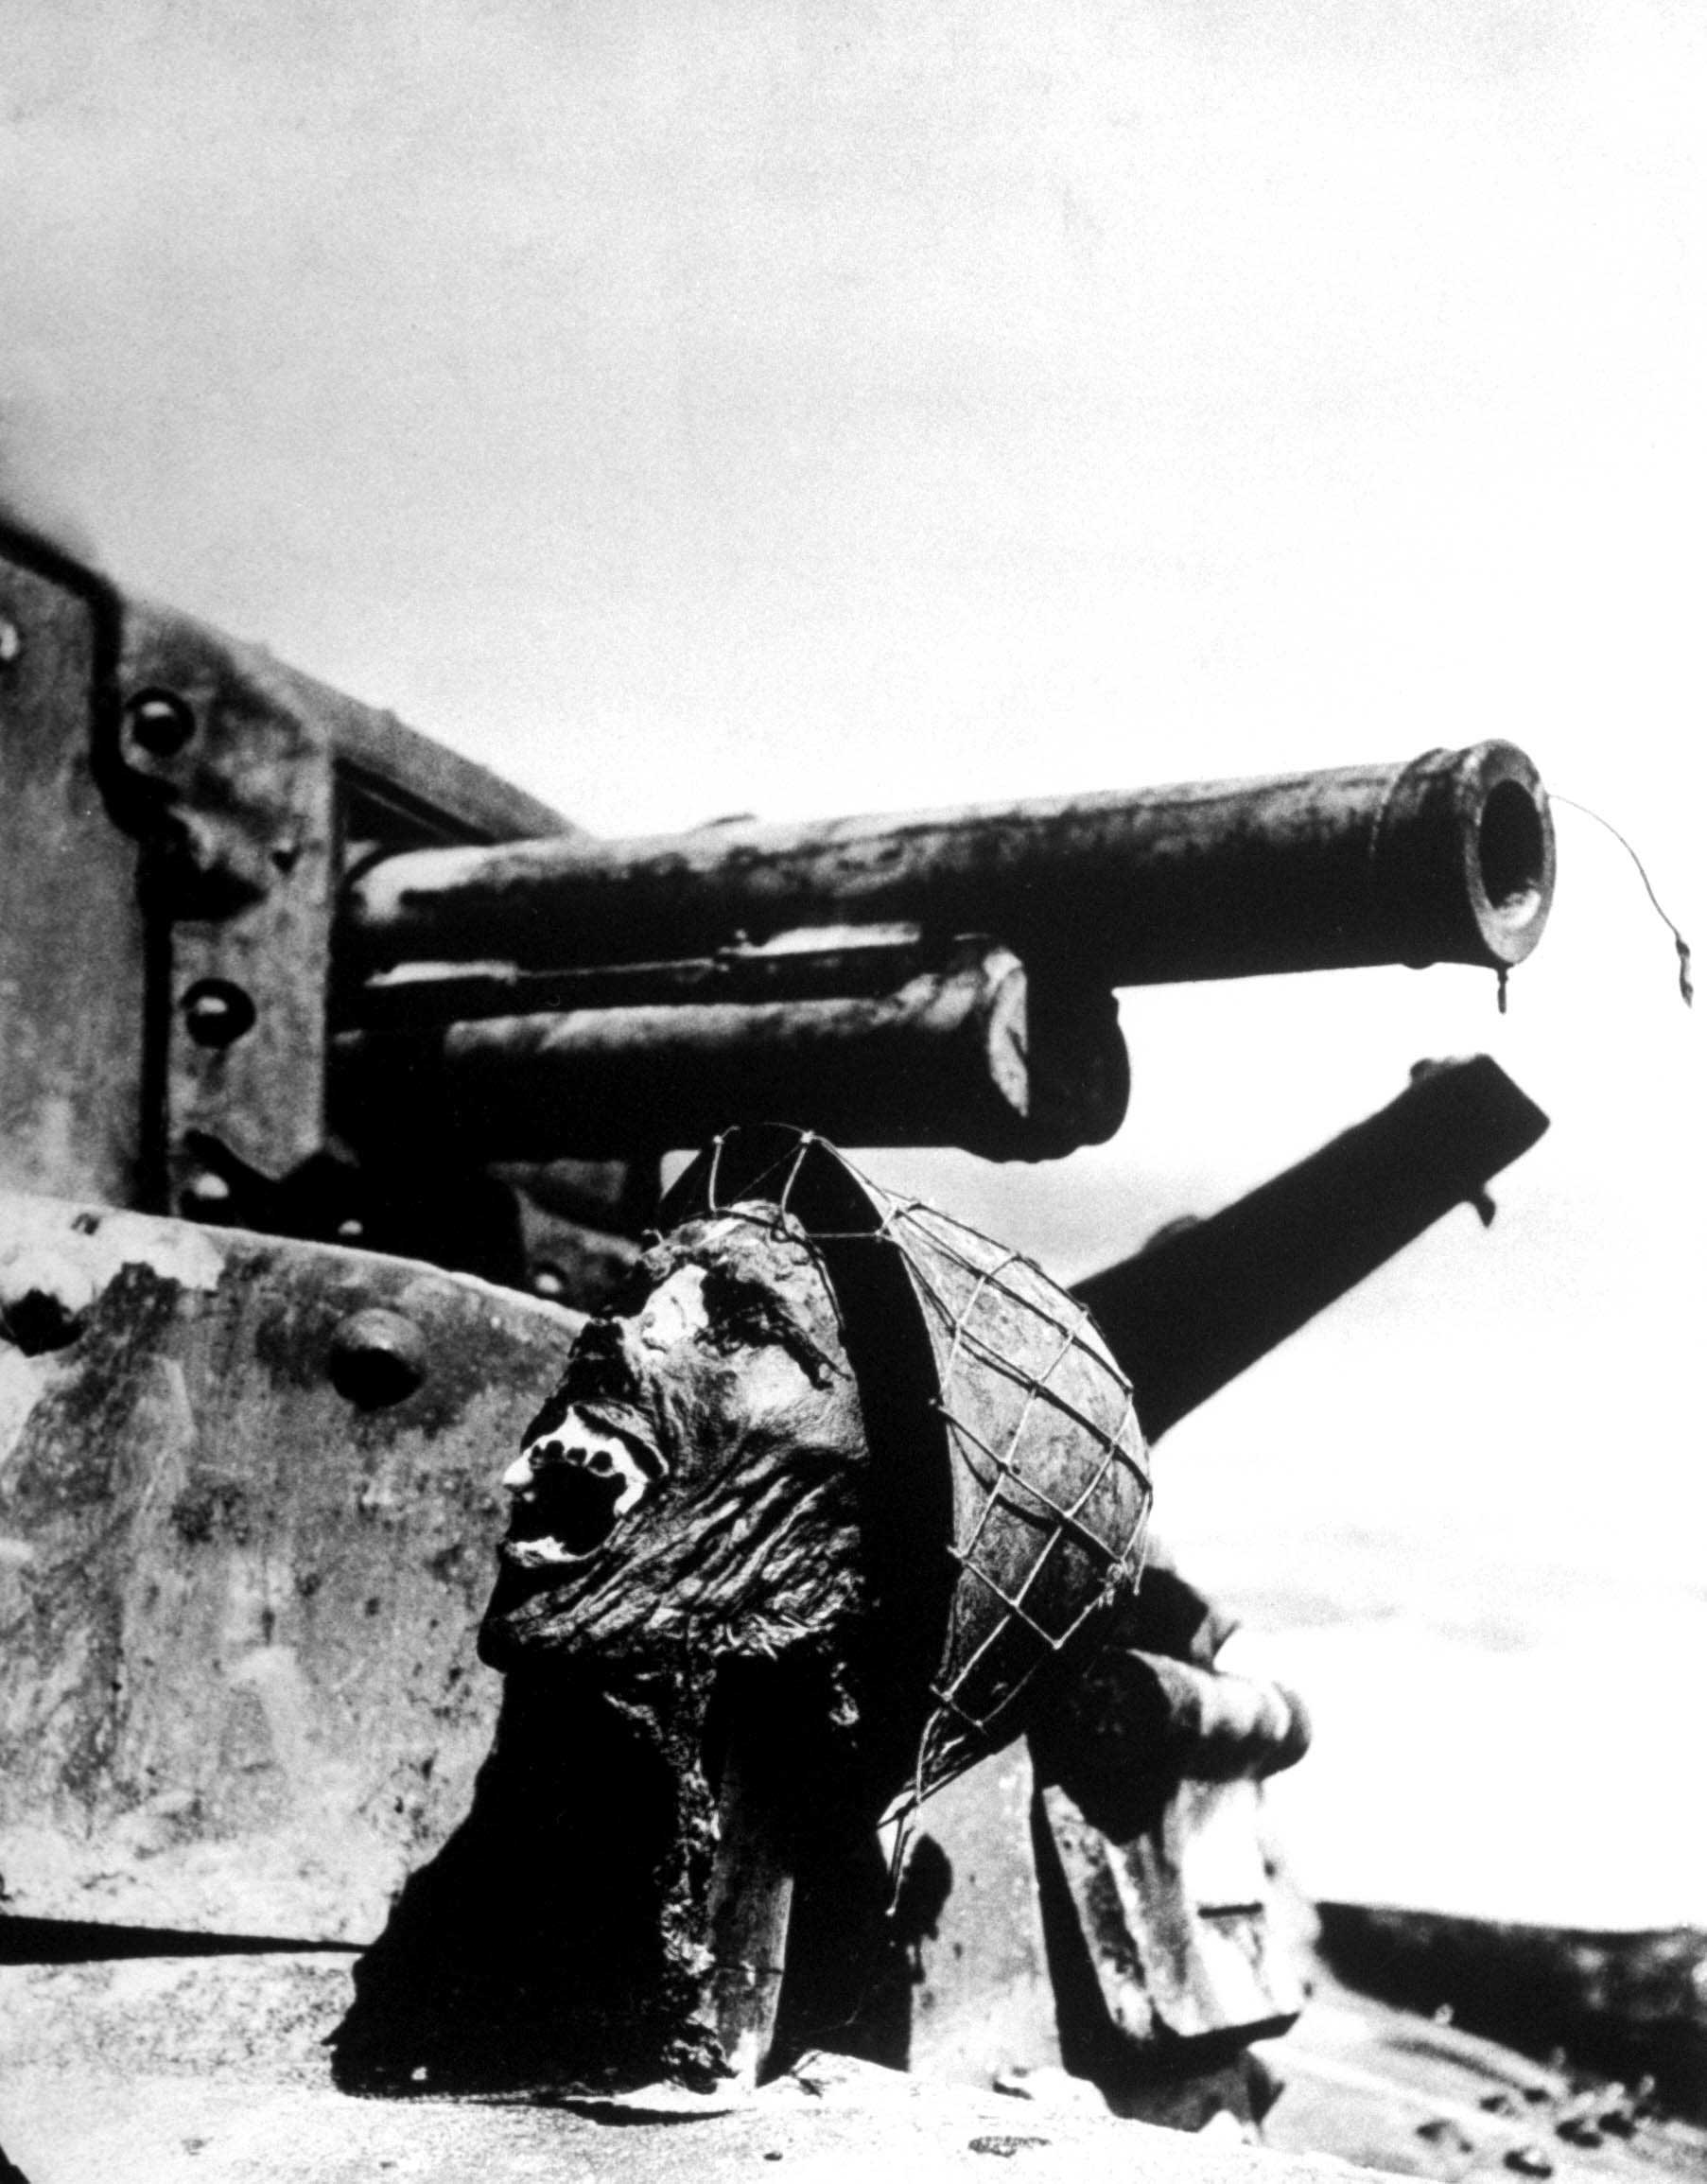 Severed head of a Japanese soldier, propped up on a disabled tank, Guadalcanal, 1942.